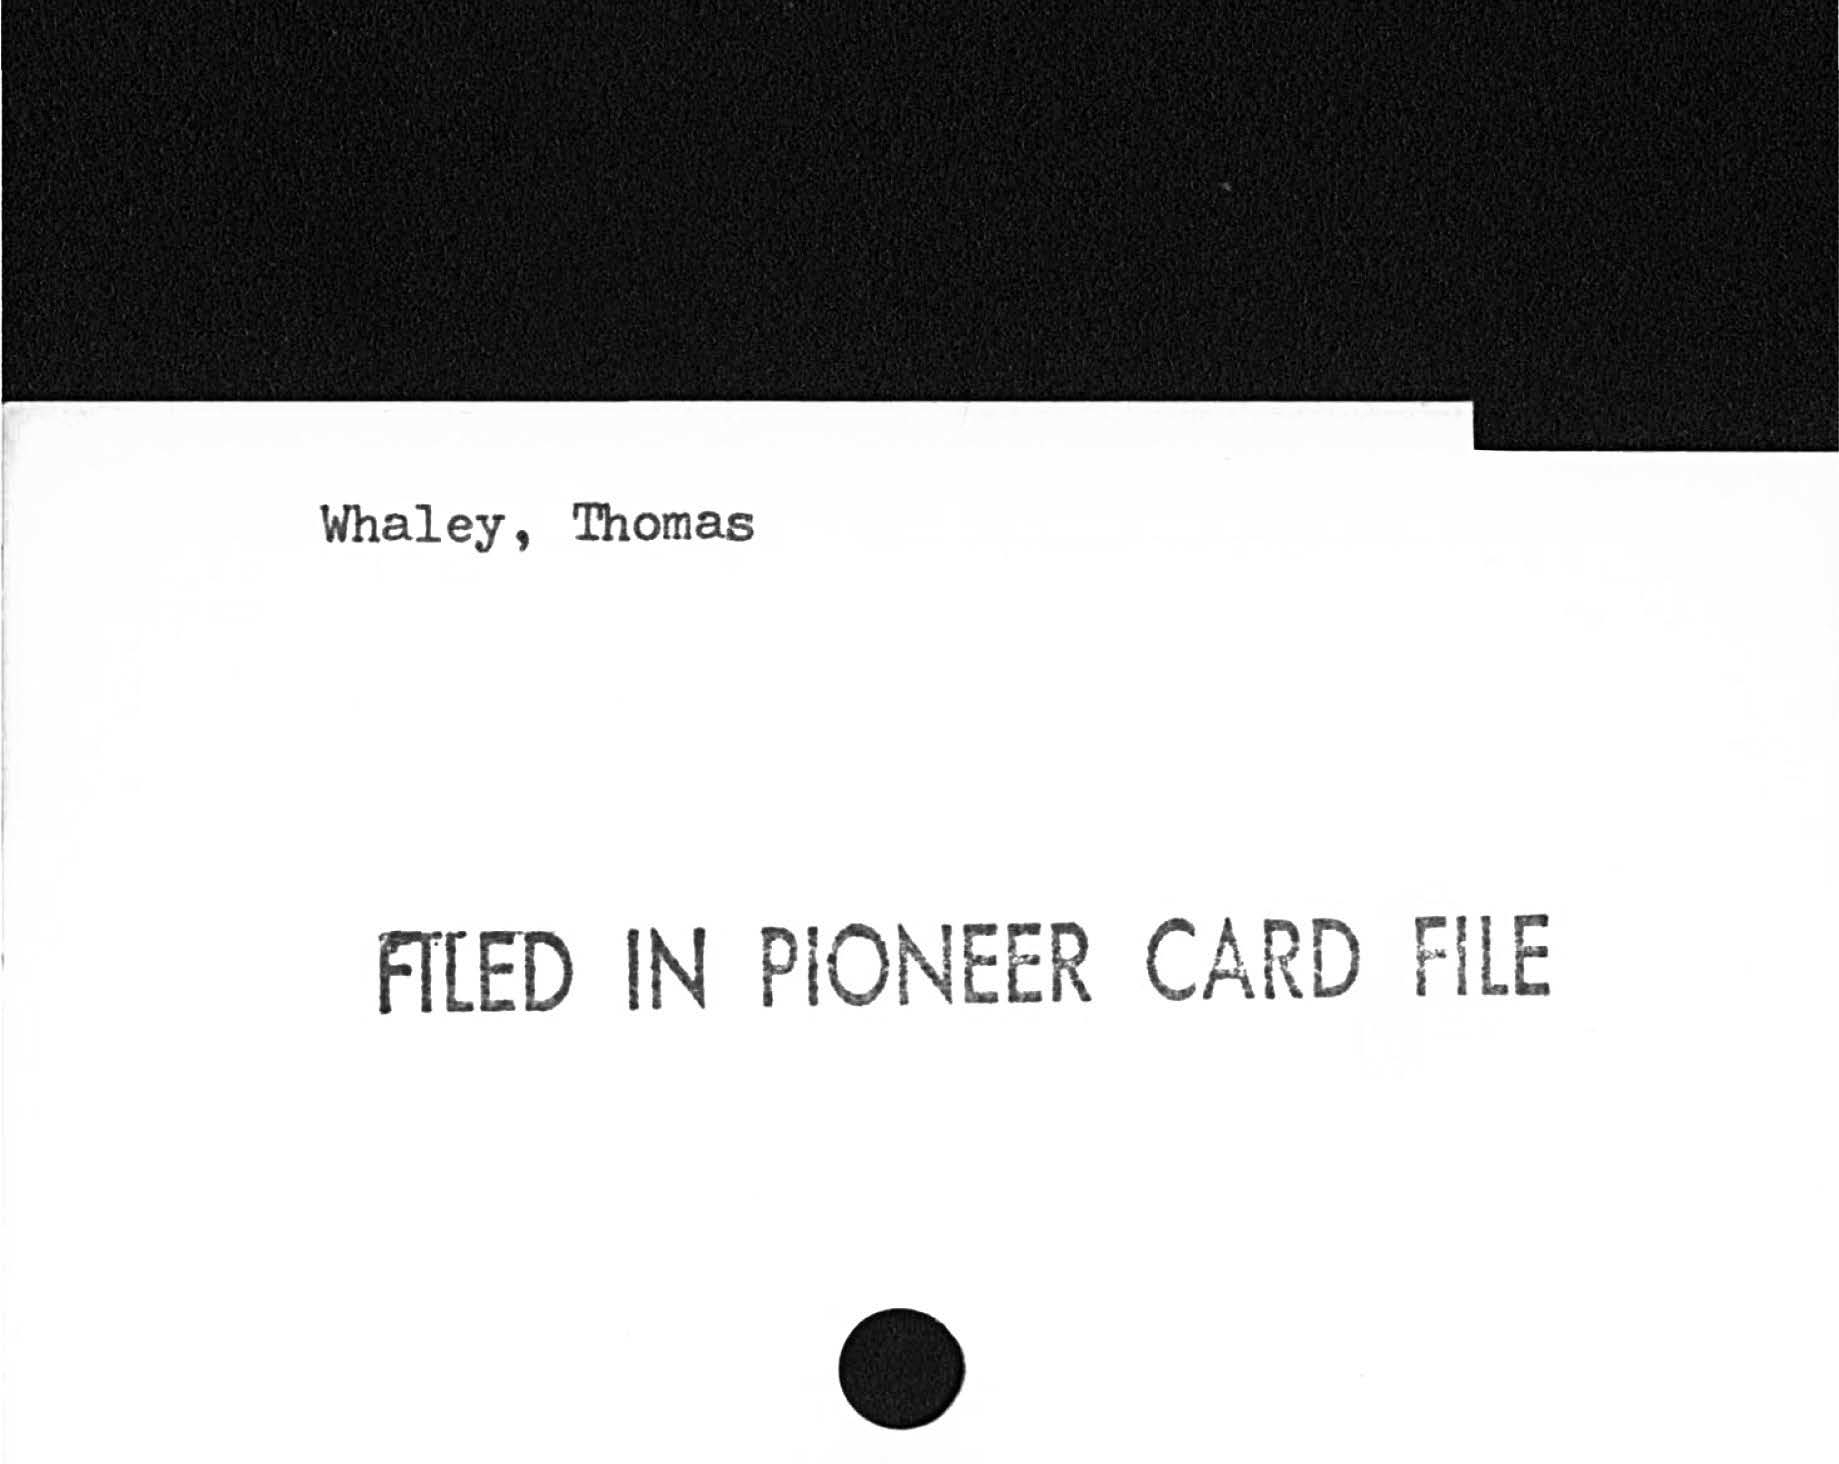 Whaley, ThomasFILED IN PIONEER CARD FILED